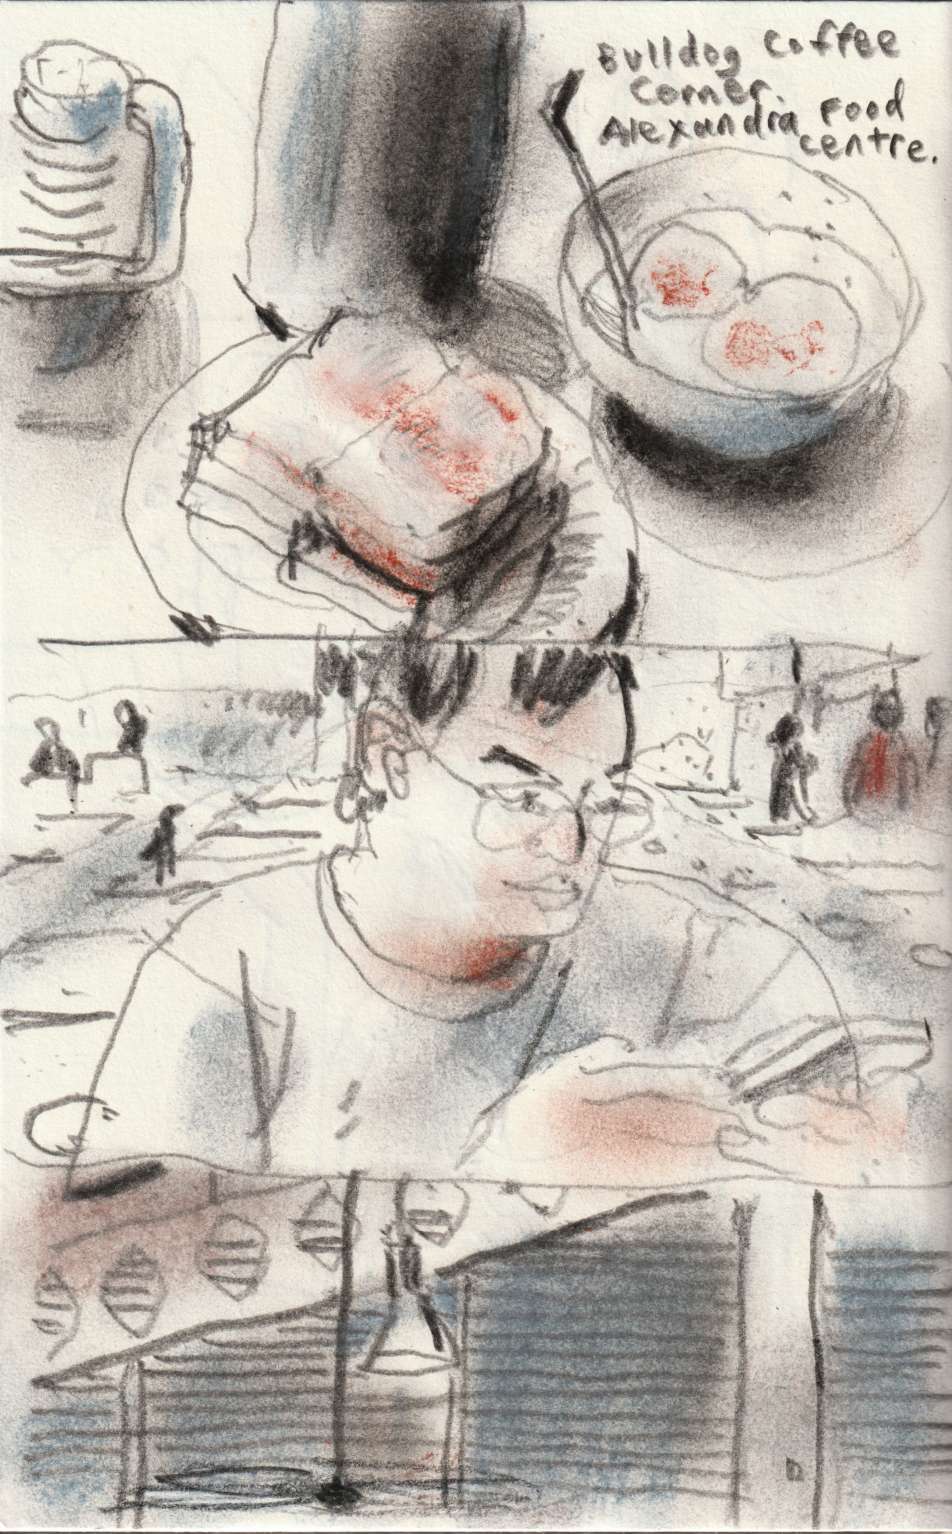 Breakfast Sketching in Singapore (toes. Roger and the Bulldog Coffee Corner)